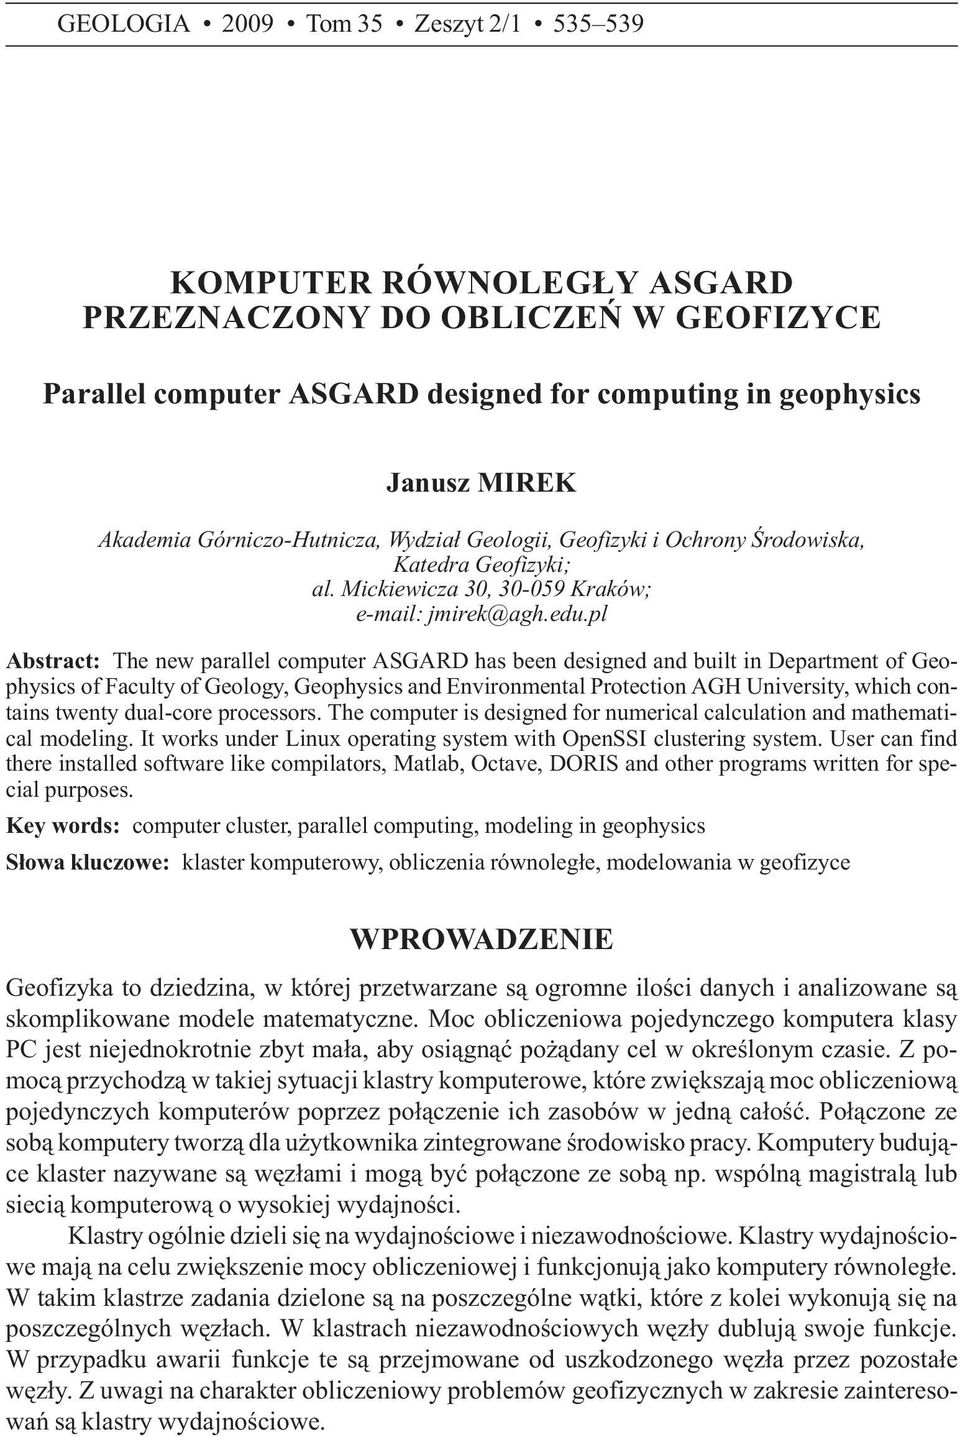 pl Abstract: The new parallel computer ASGARD has been designed and built in Department of Geophysics of Faculty of Geology, Geophysics and Environmental Protection AGH University, which contains